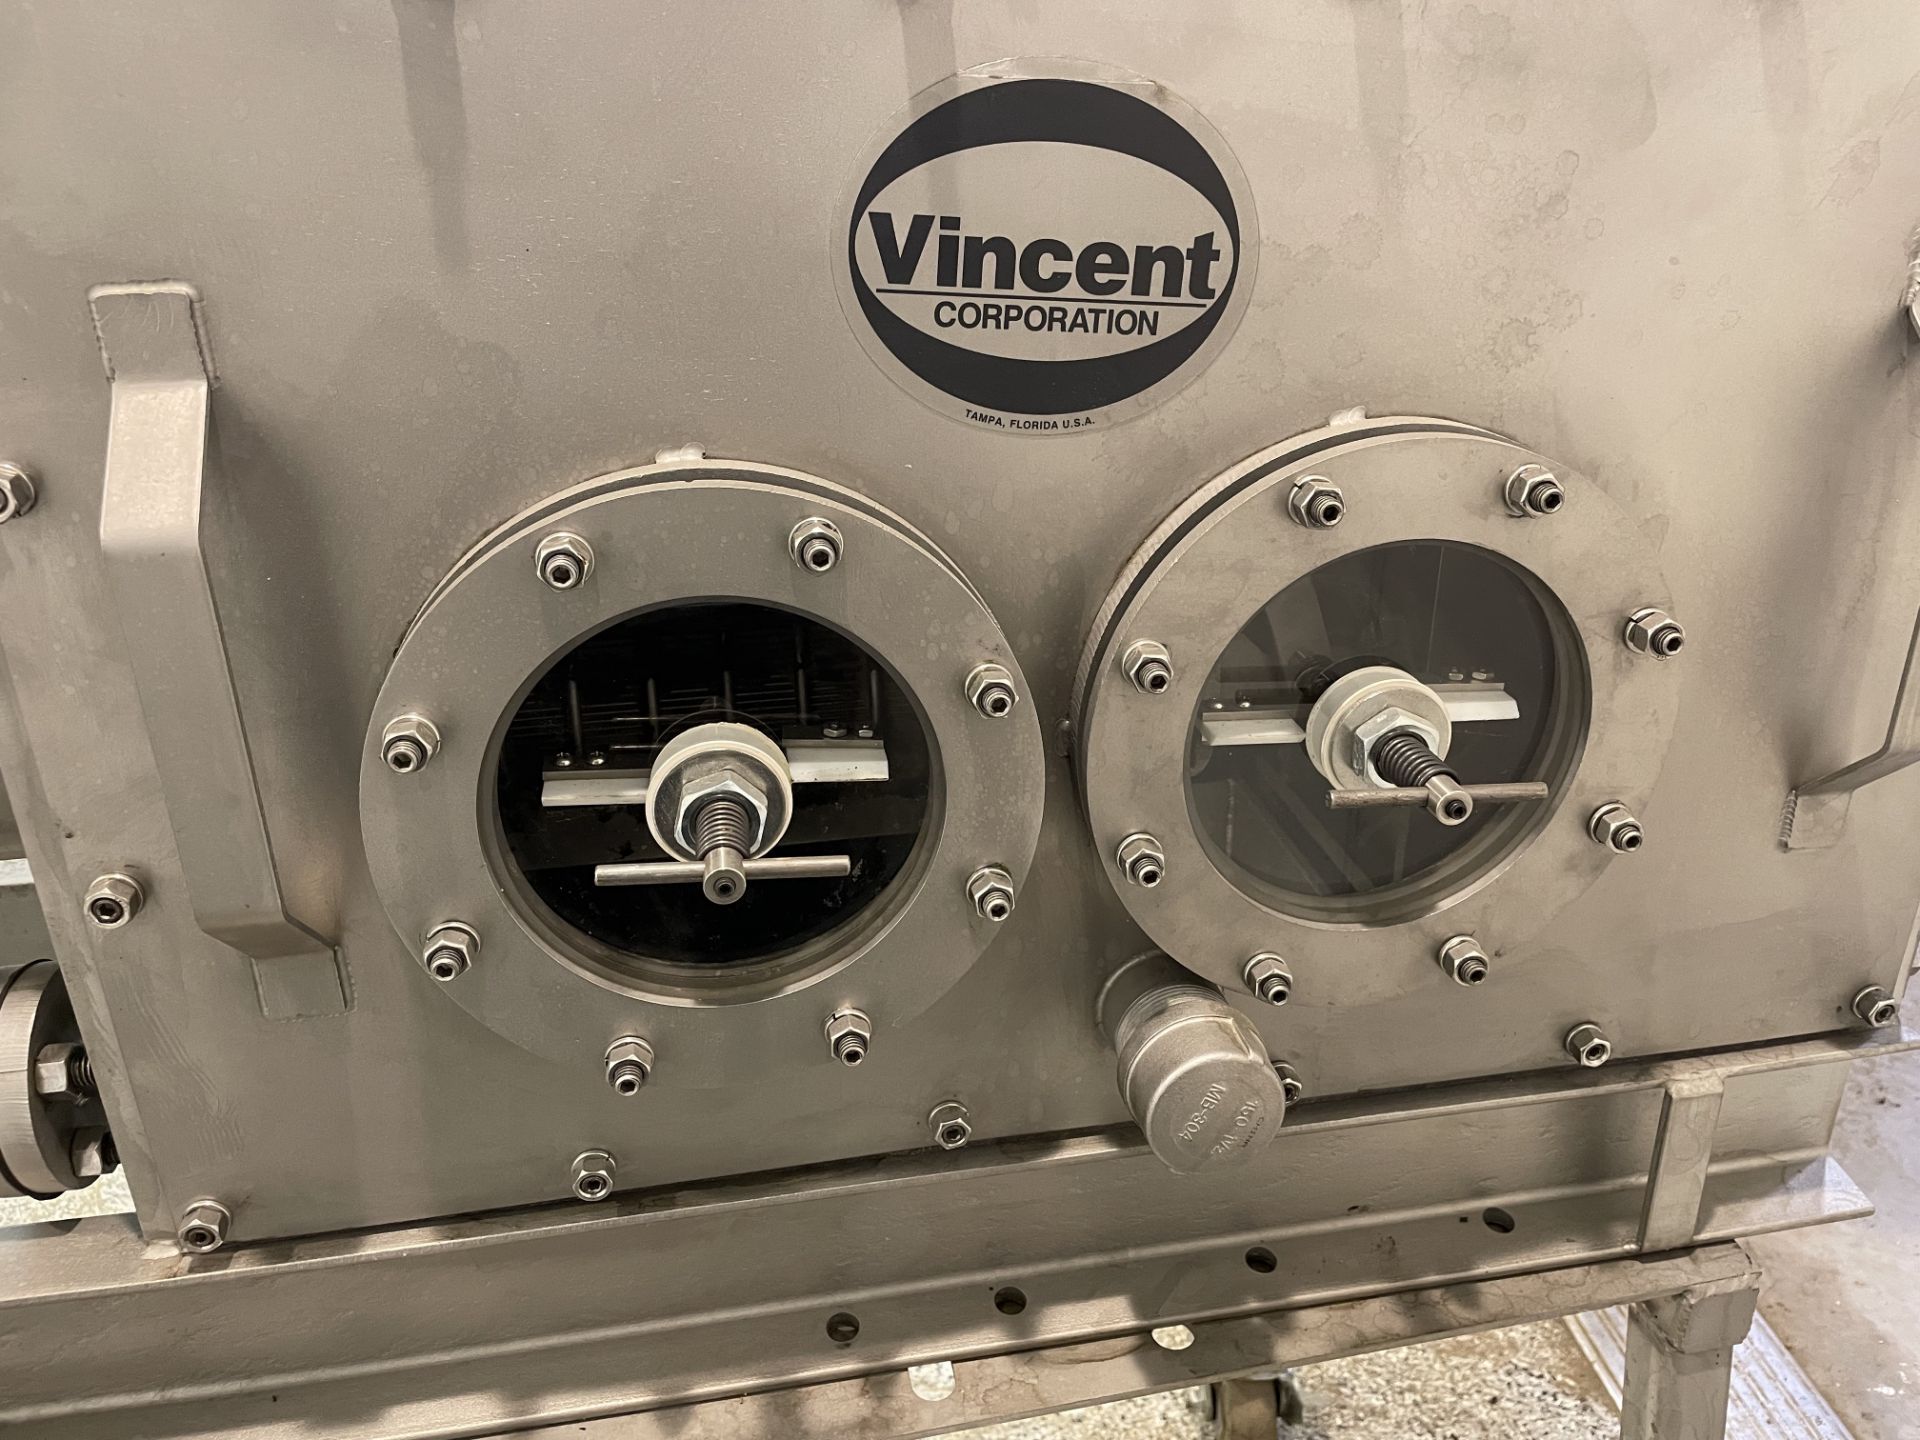 Used Vincent Corporation Compact Screw Press. Model CP-4-VT - Image 7 of 35